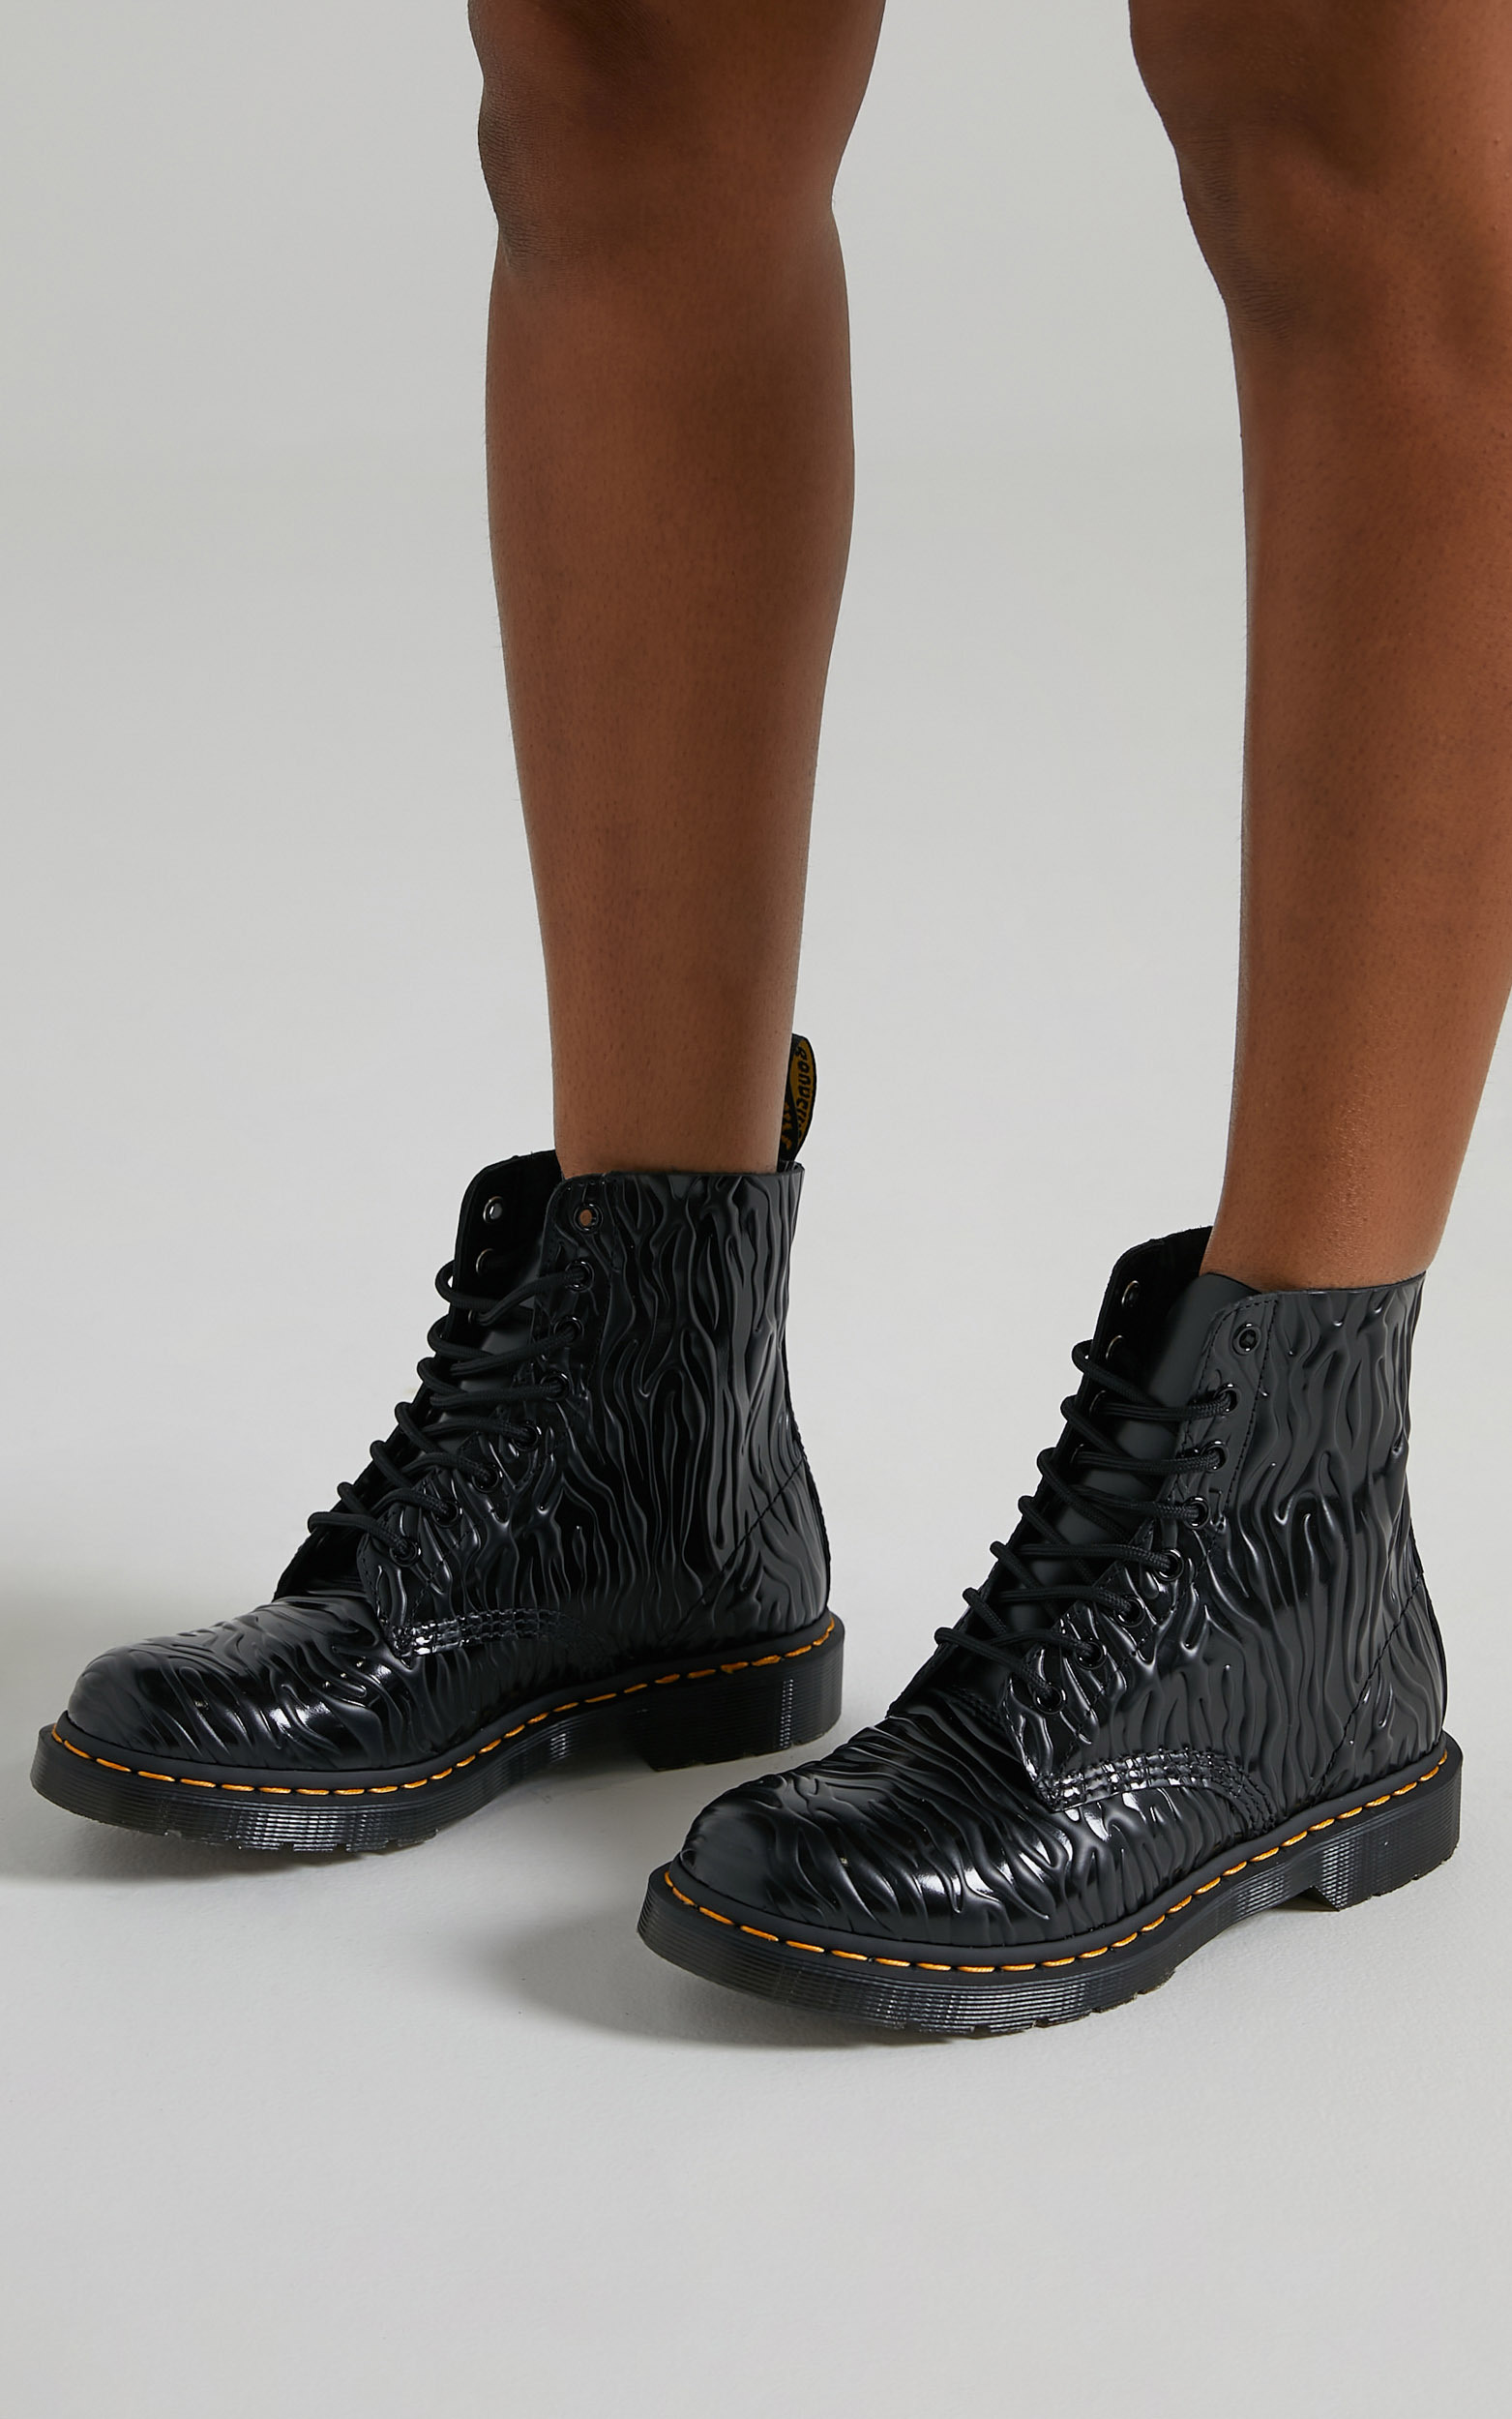 Dr. Martens - 1460 Pascal 8 Eye Boot in Black Zebra Gloss Emboss Smooth - 05, BLK1, hi-res image number null